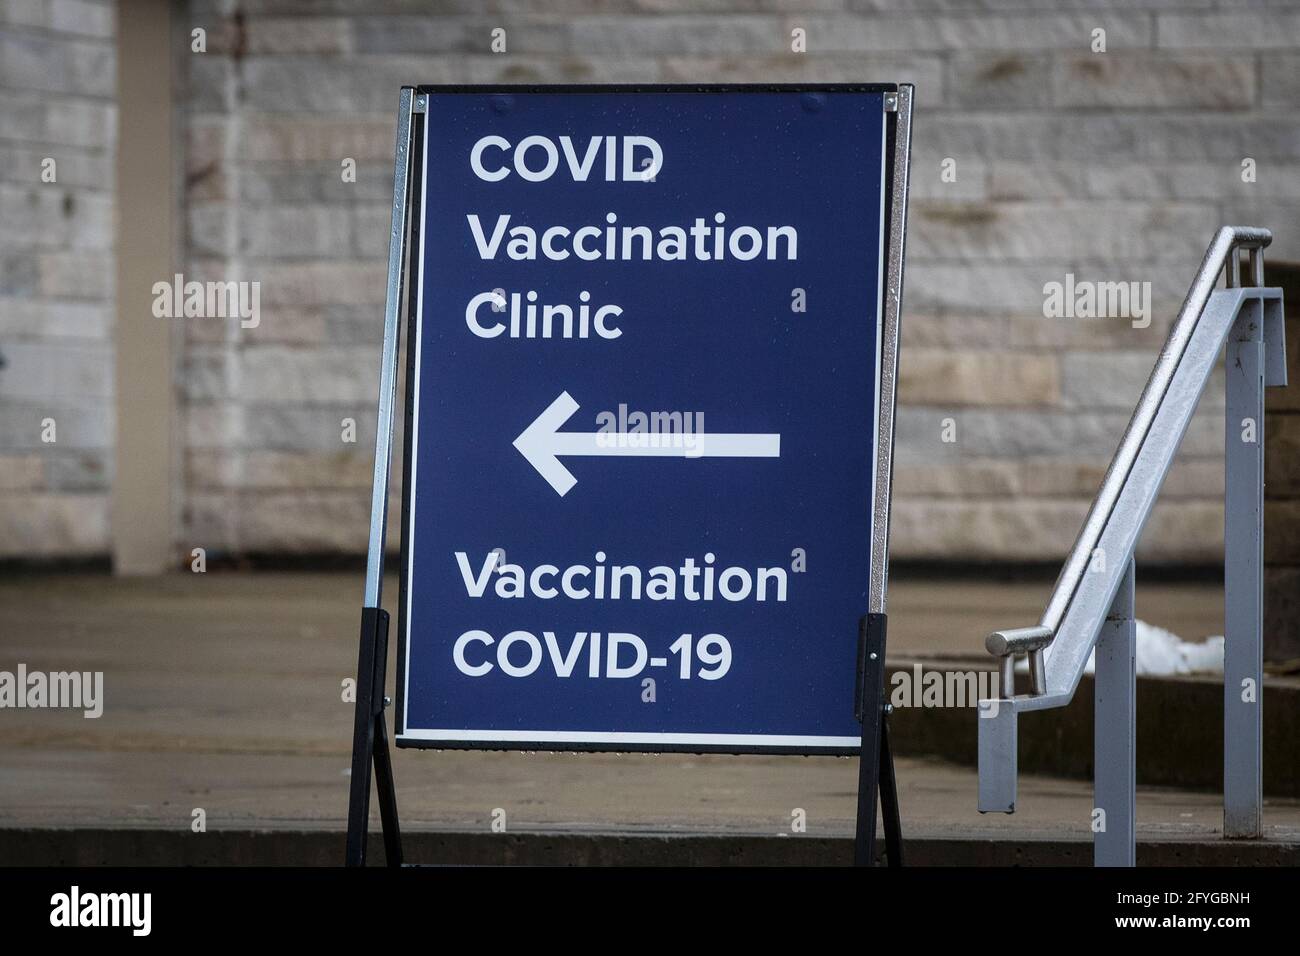 A sign for the COVID vaccination clinic at Kingston General Hospital (KGH) in Kingston, Ontario on Saturday, January 16, 2021, as the COVID-19 pandemi Stock Photo